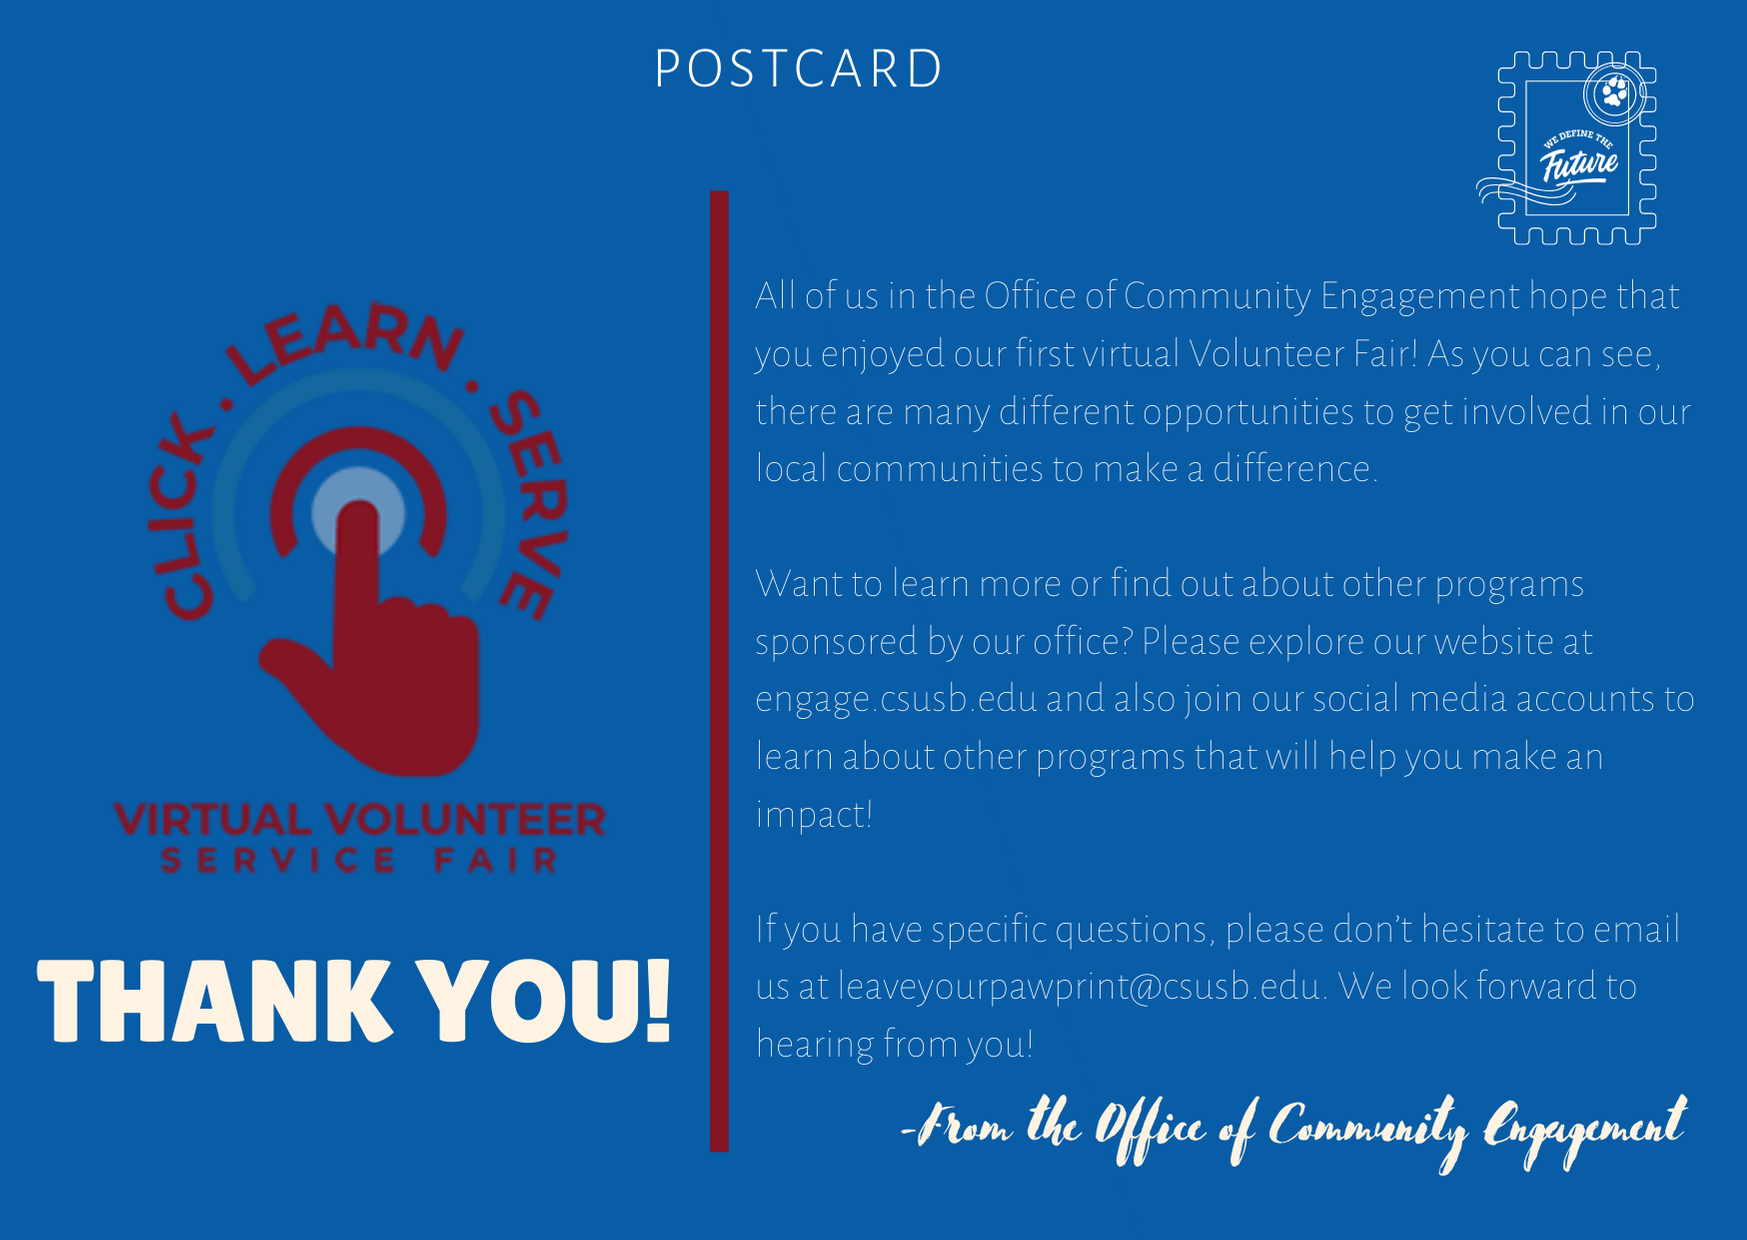 Thank you message to our nonprofit organizations and Yotes who participated in our first Virtual Volunteer Service Fair.